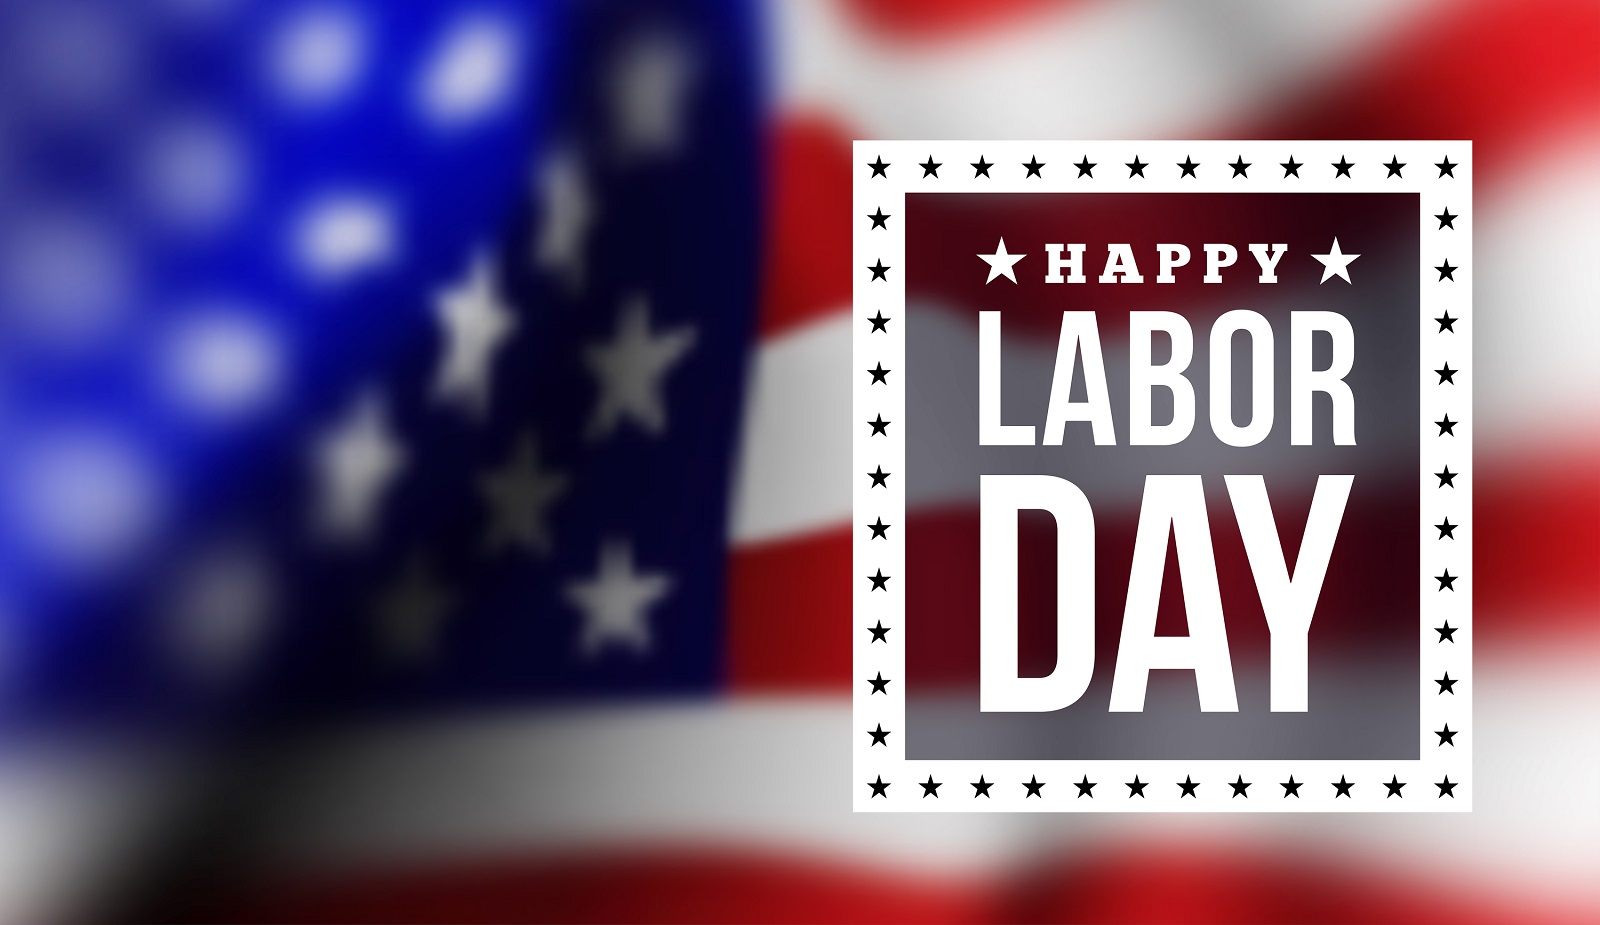 Happy Labor  Day image for Jean-Luc Andriot blog 090318